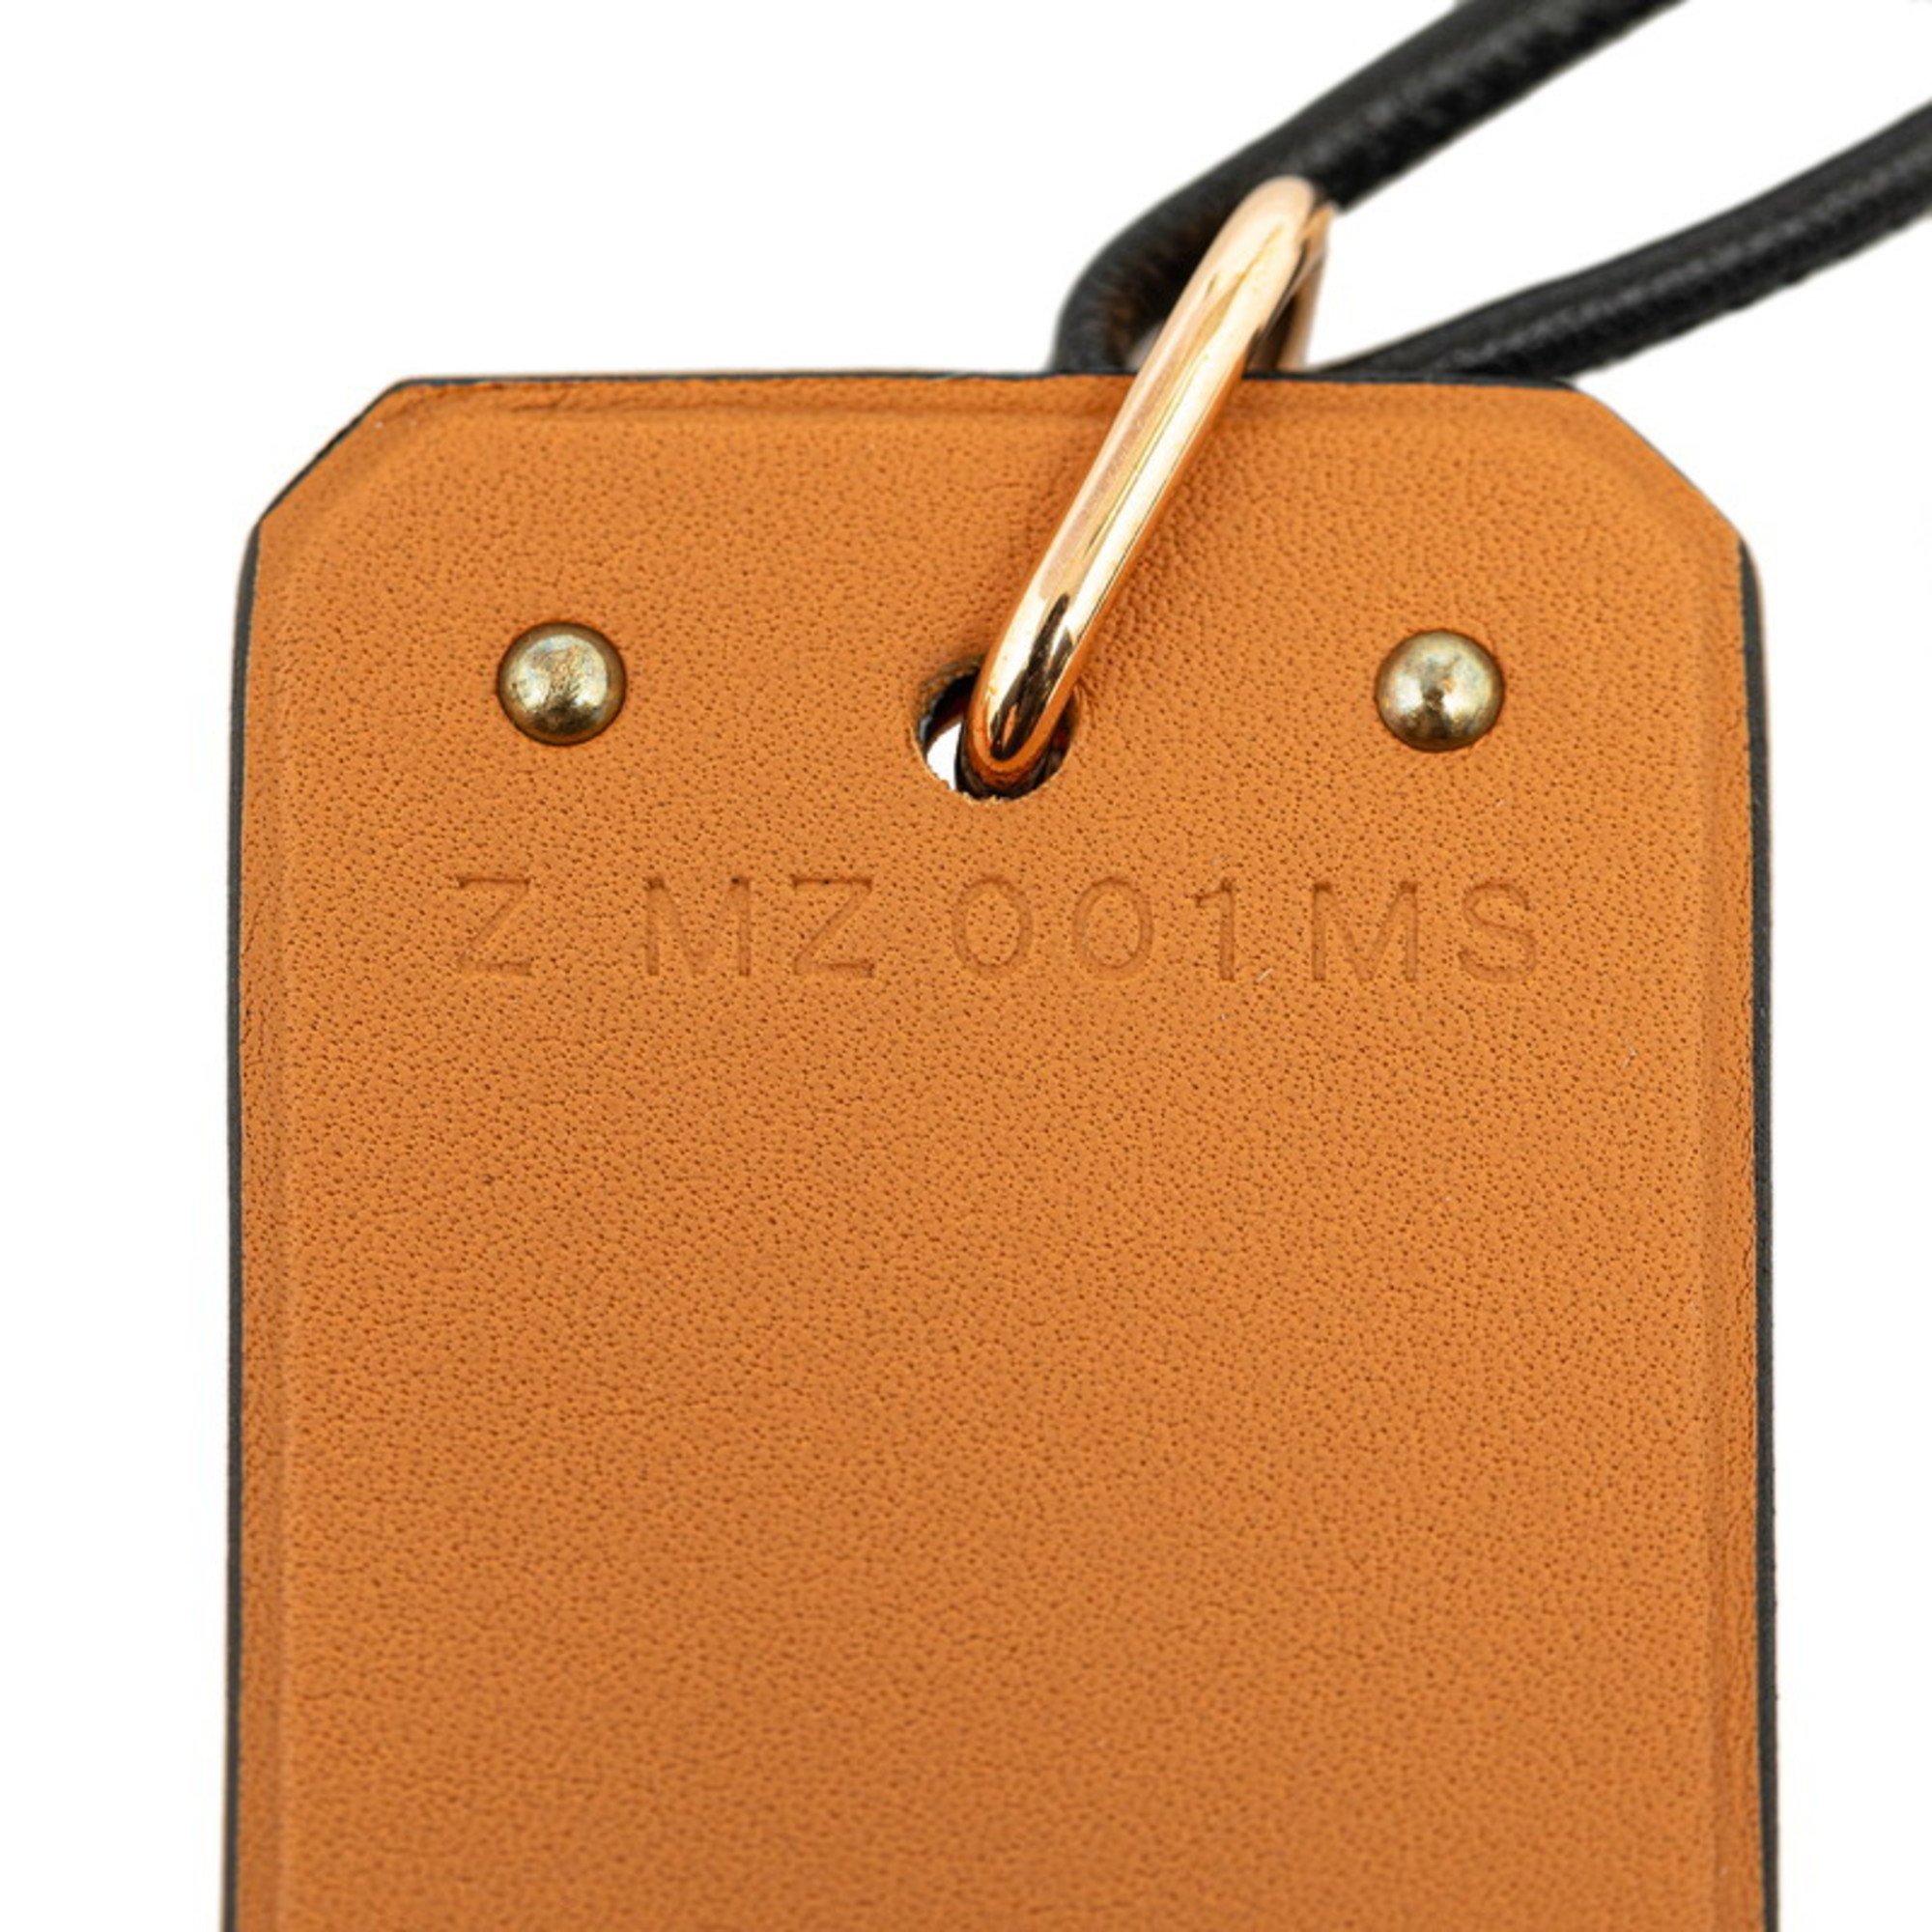 Hermes Ace of Hearts Necklace Black Pink Gold Swift Leather Women's HERMES